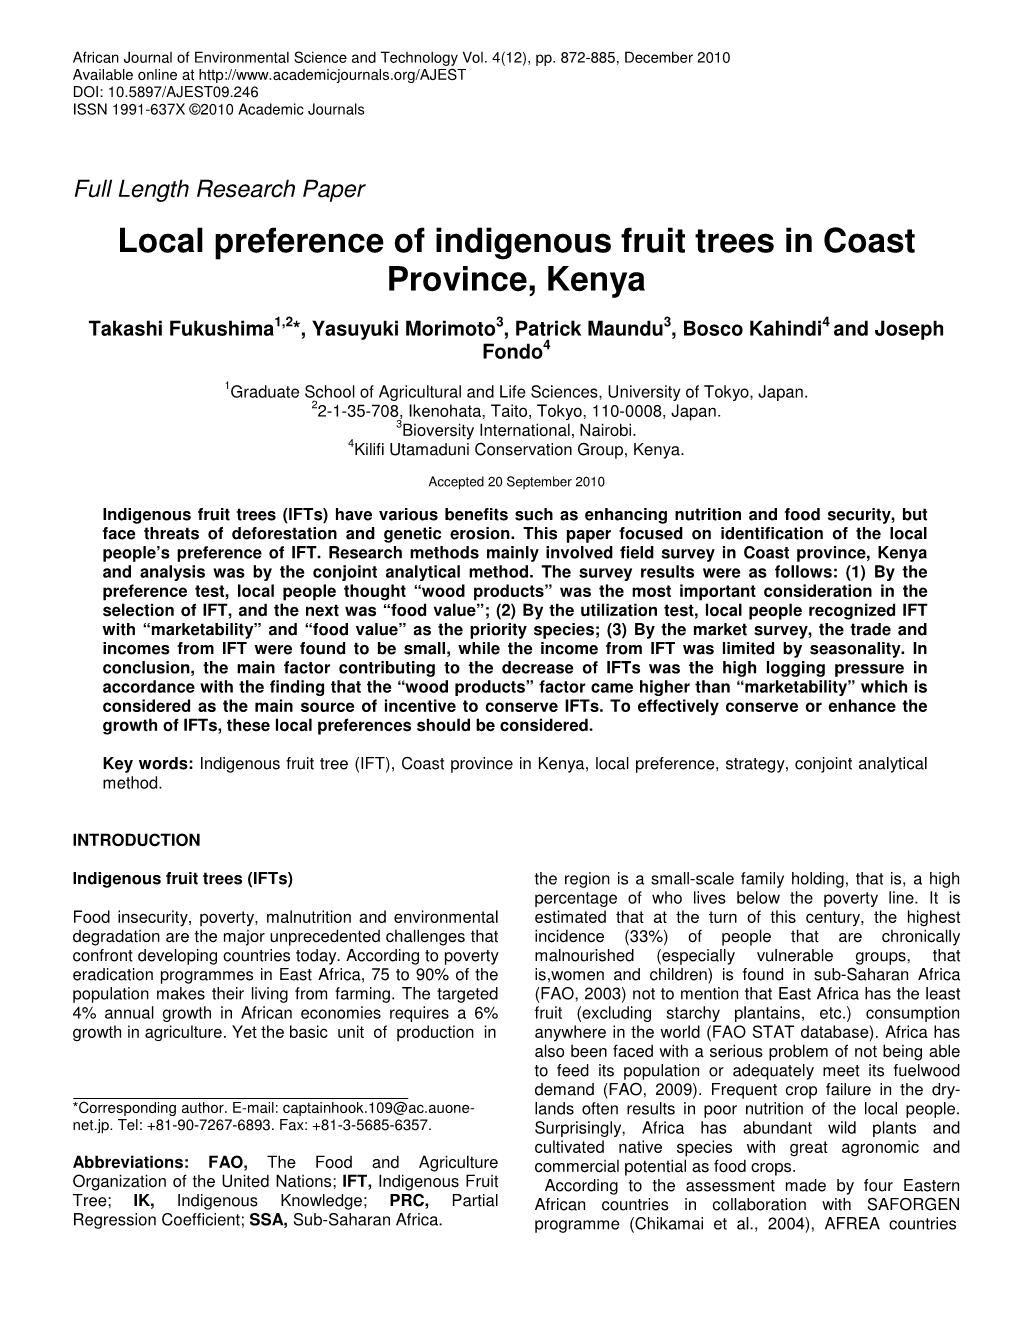 Local Preference of Indigenous Fruit Trees in Coast Province, Kenya